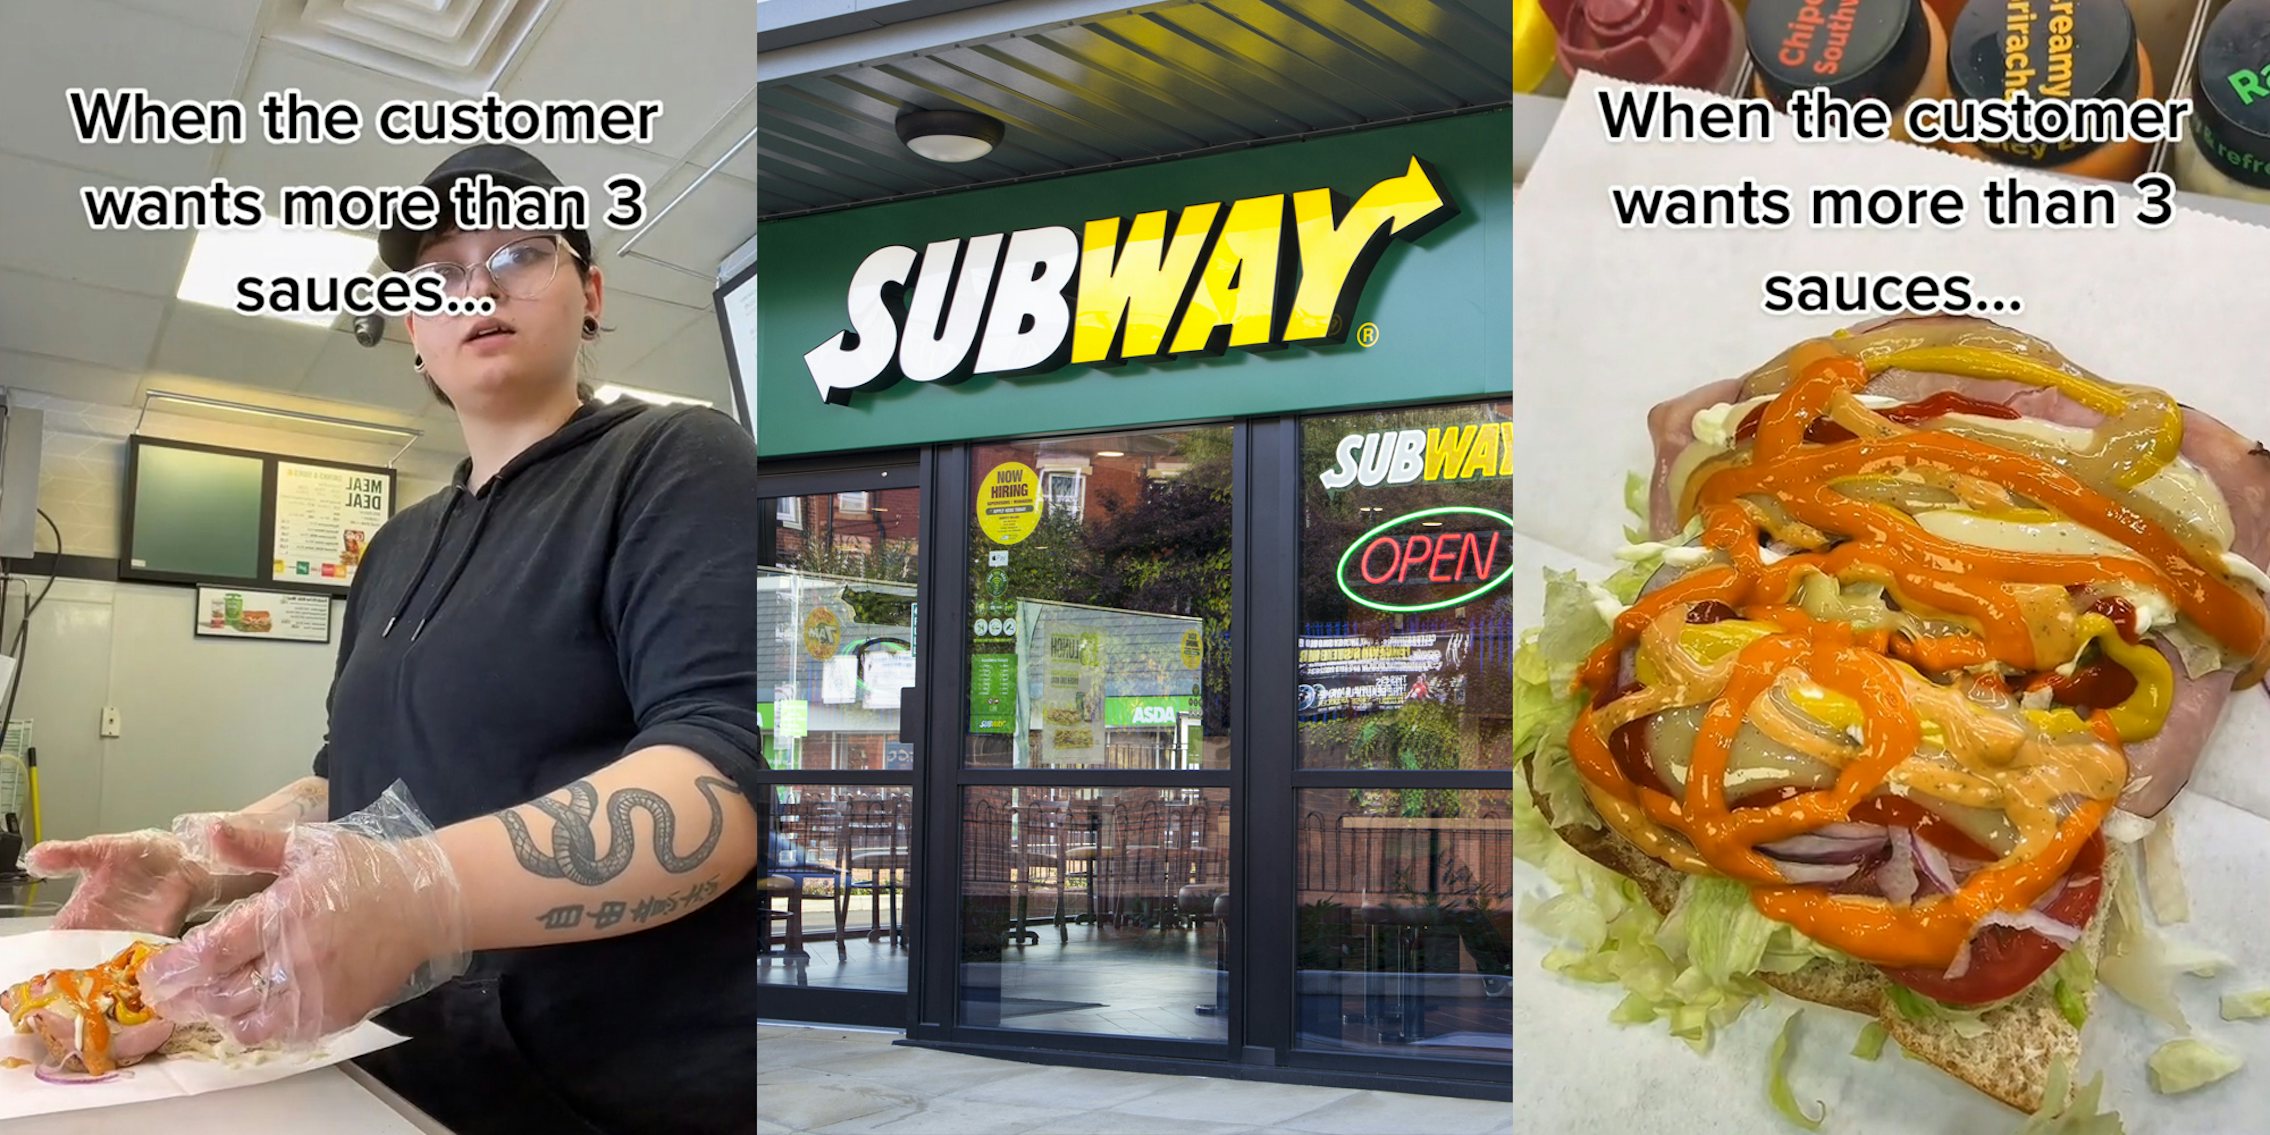 Subway employee making sandwich with caption 'When the customer wants more than 3 sauces' (l) Subway building with sign (c) Subway sandwich coated in sauce with caption 'When the customer wants more than 3 sauces' (r)